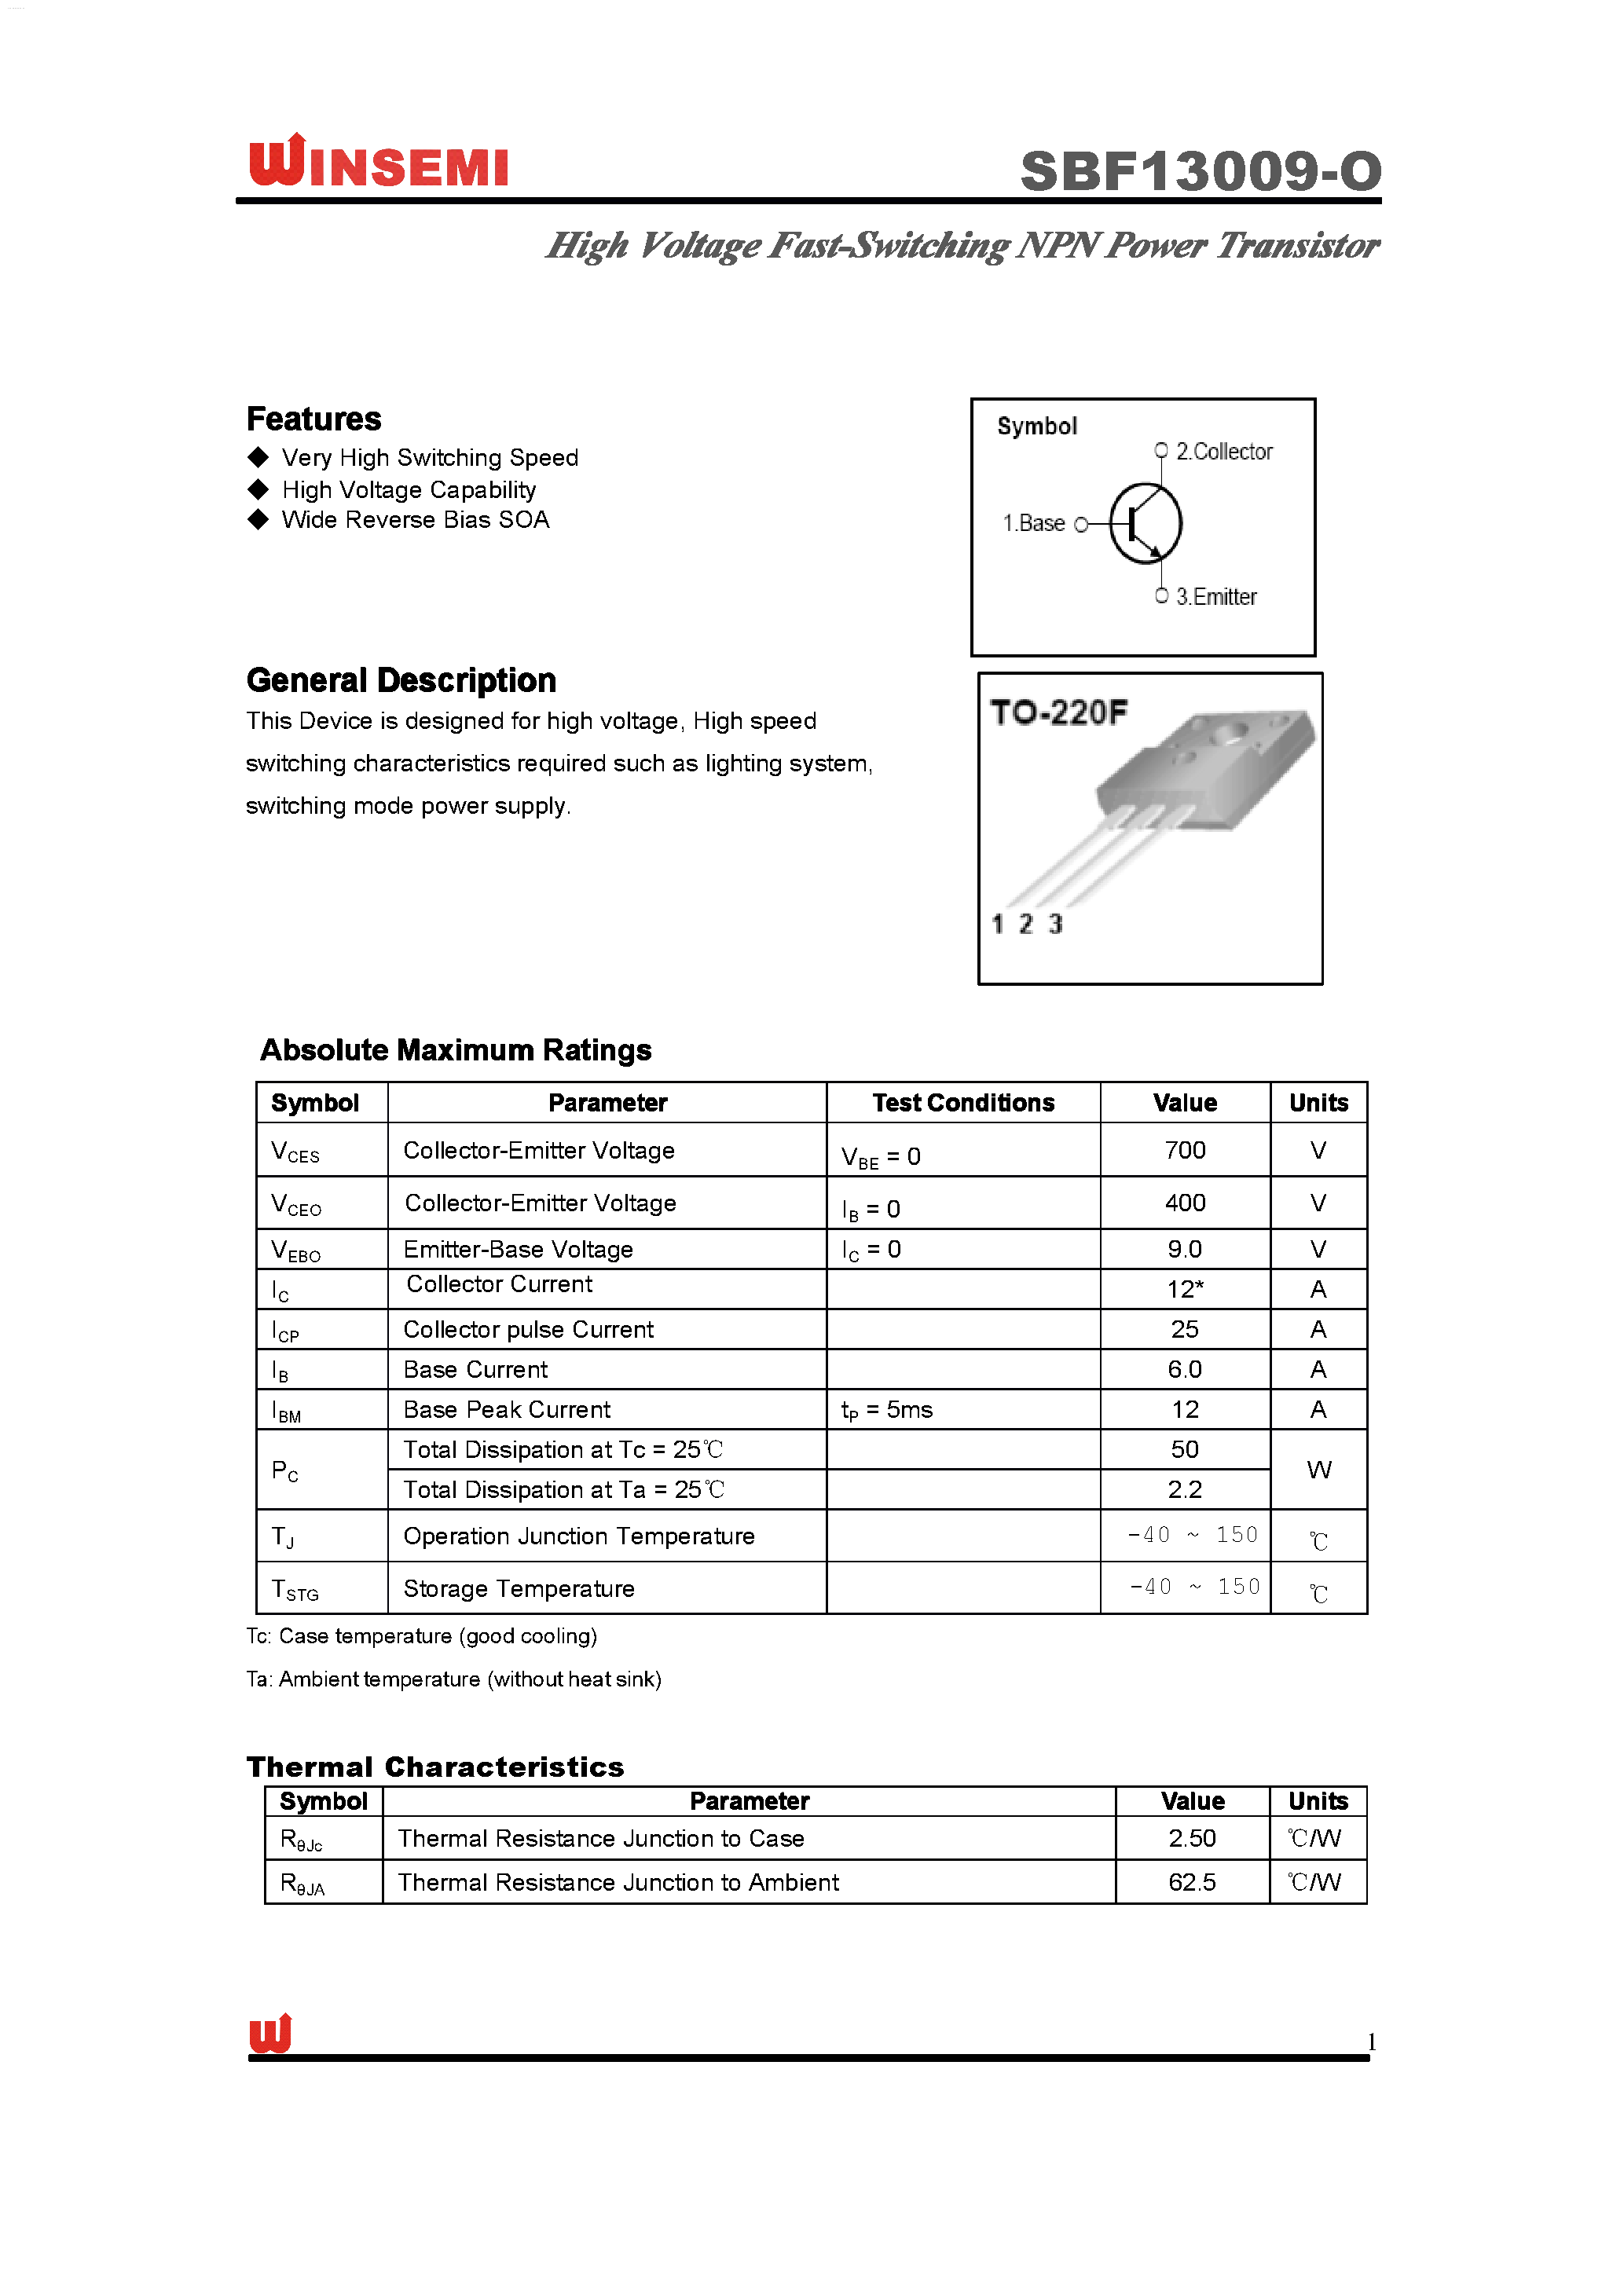 Datasheet SBF13009-O - High Voltage Fast-Switching NPN Power Transistor page 1